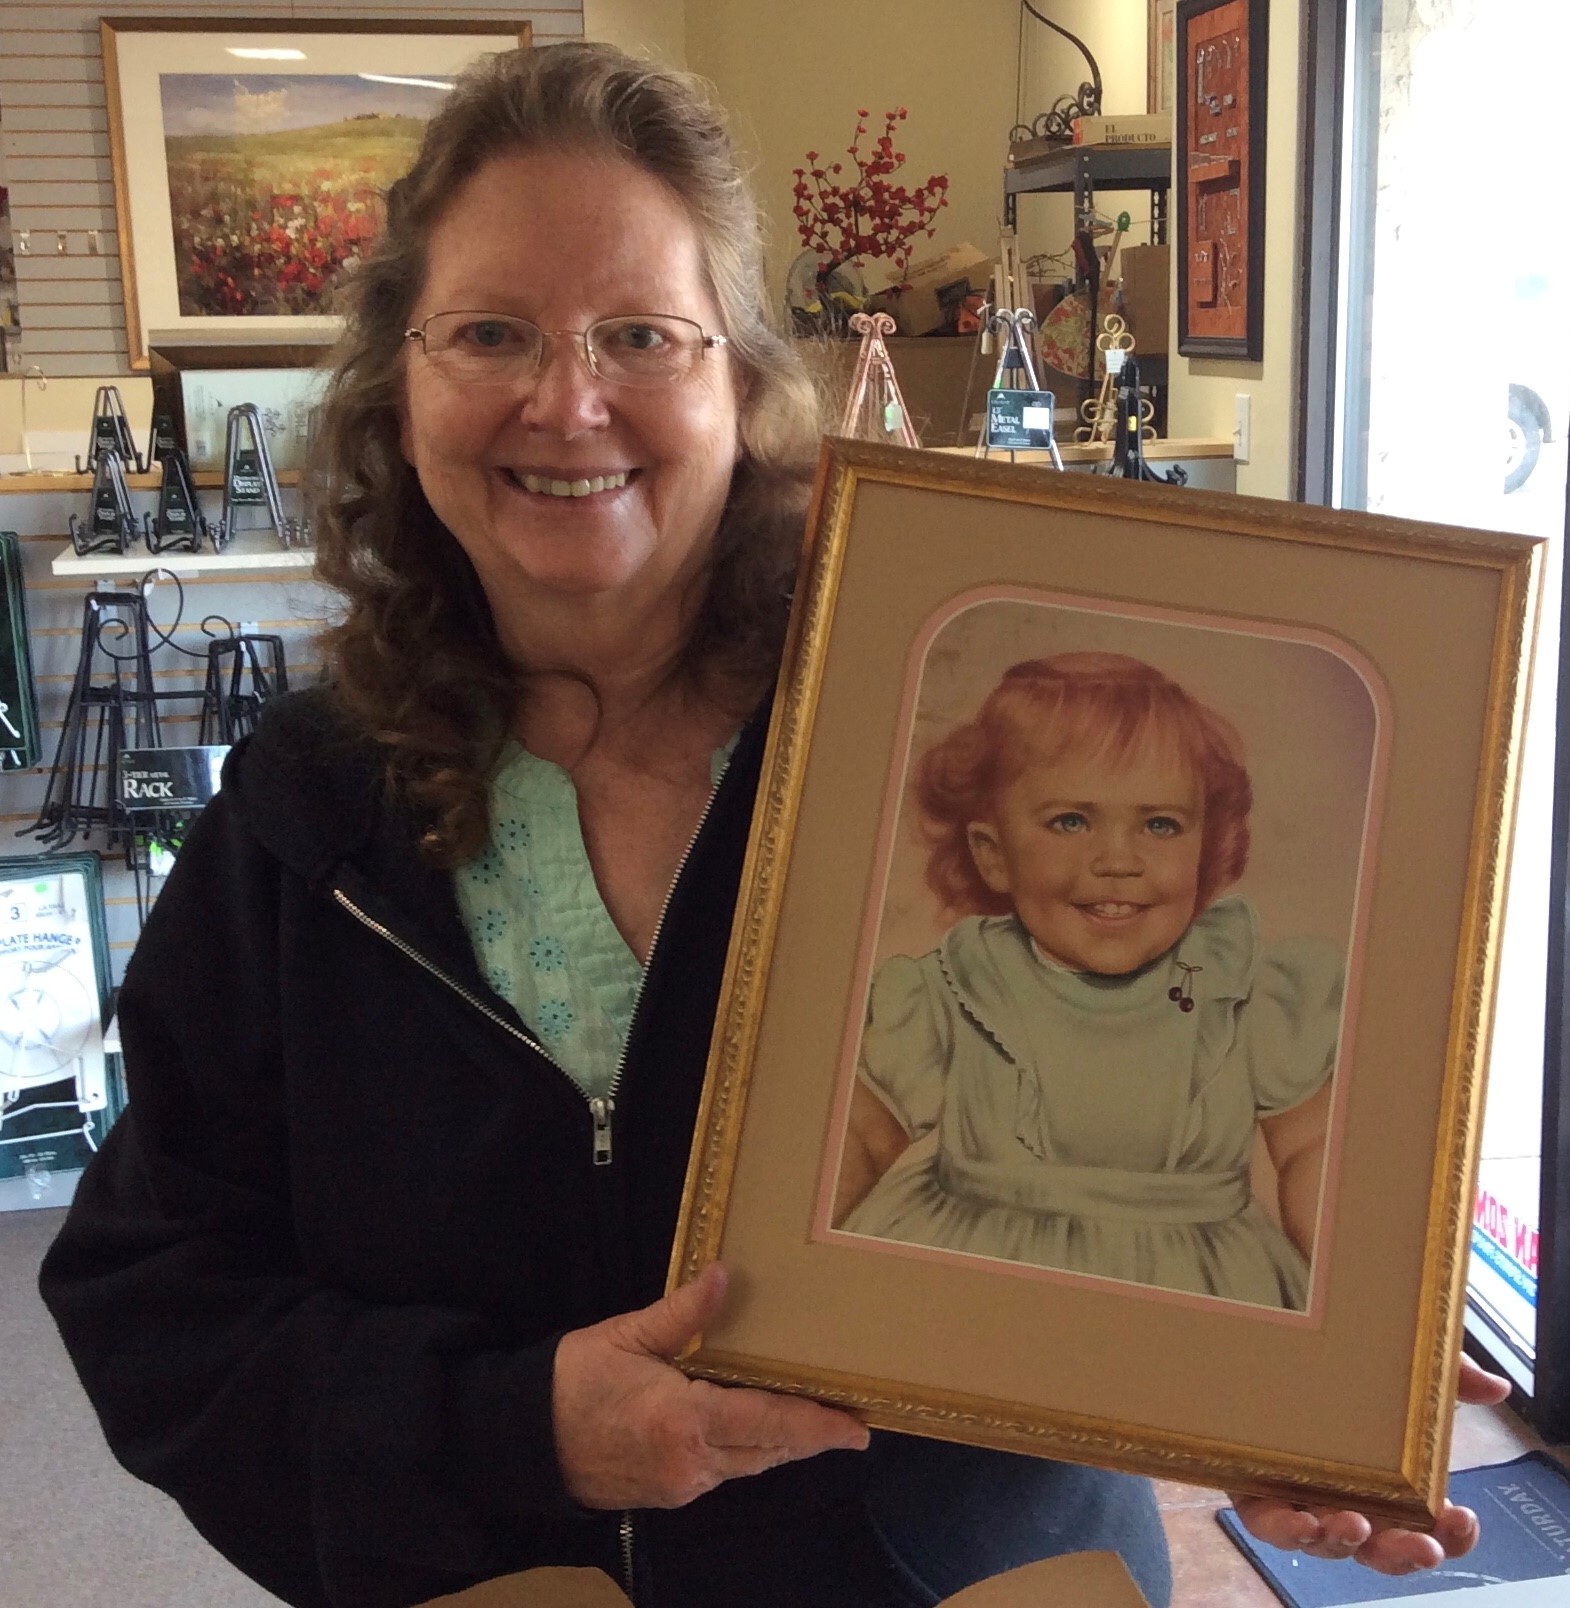 Woman holding framed drawing of girl